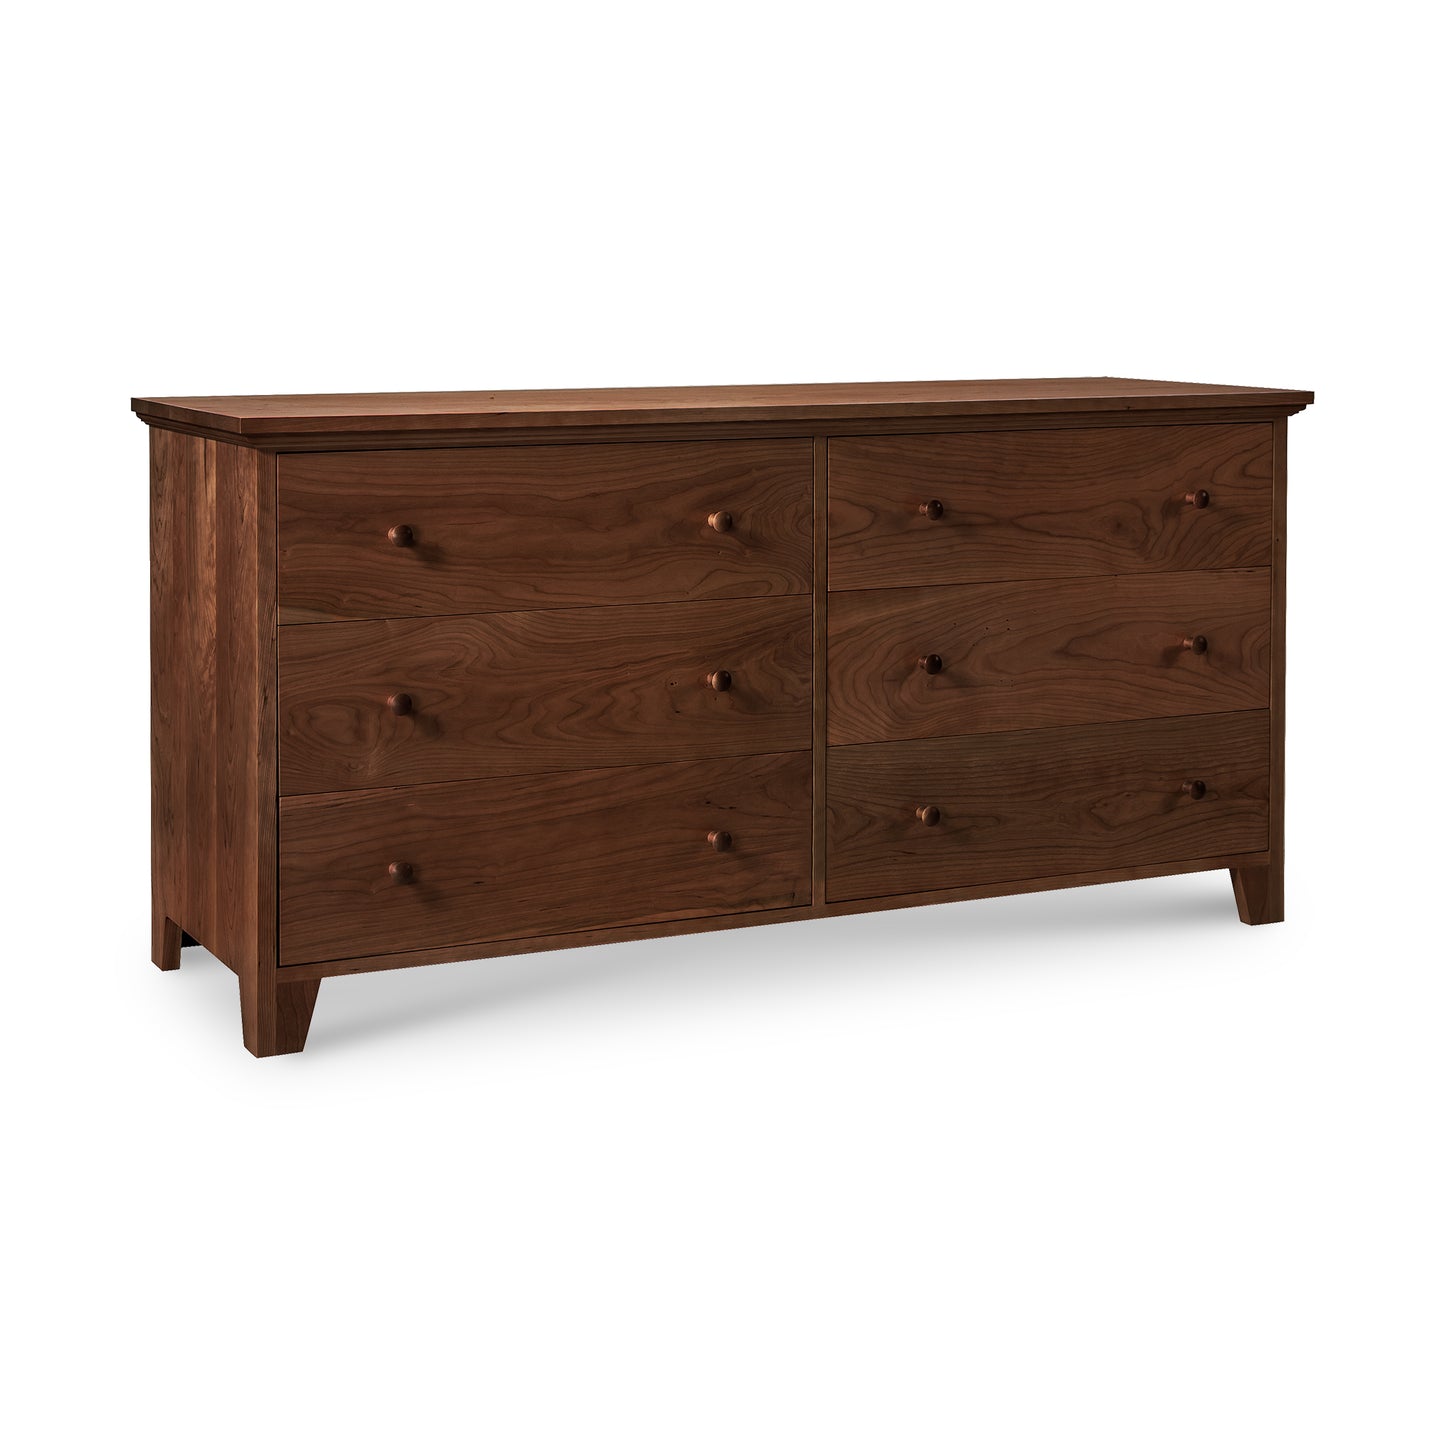 A Lyndon Furniture American Country 6-Drawer Dresser made of solid wood with drawers on a white background.